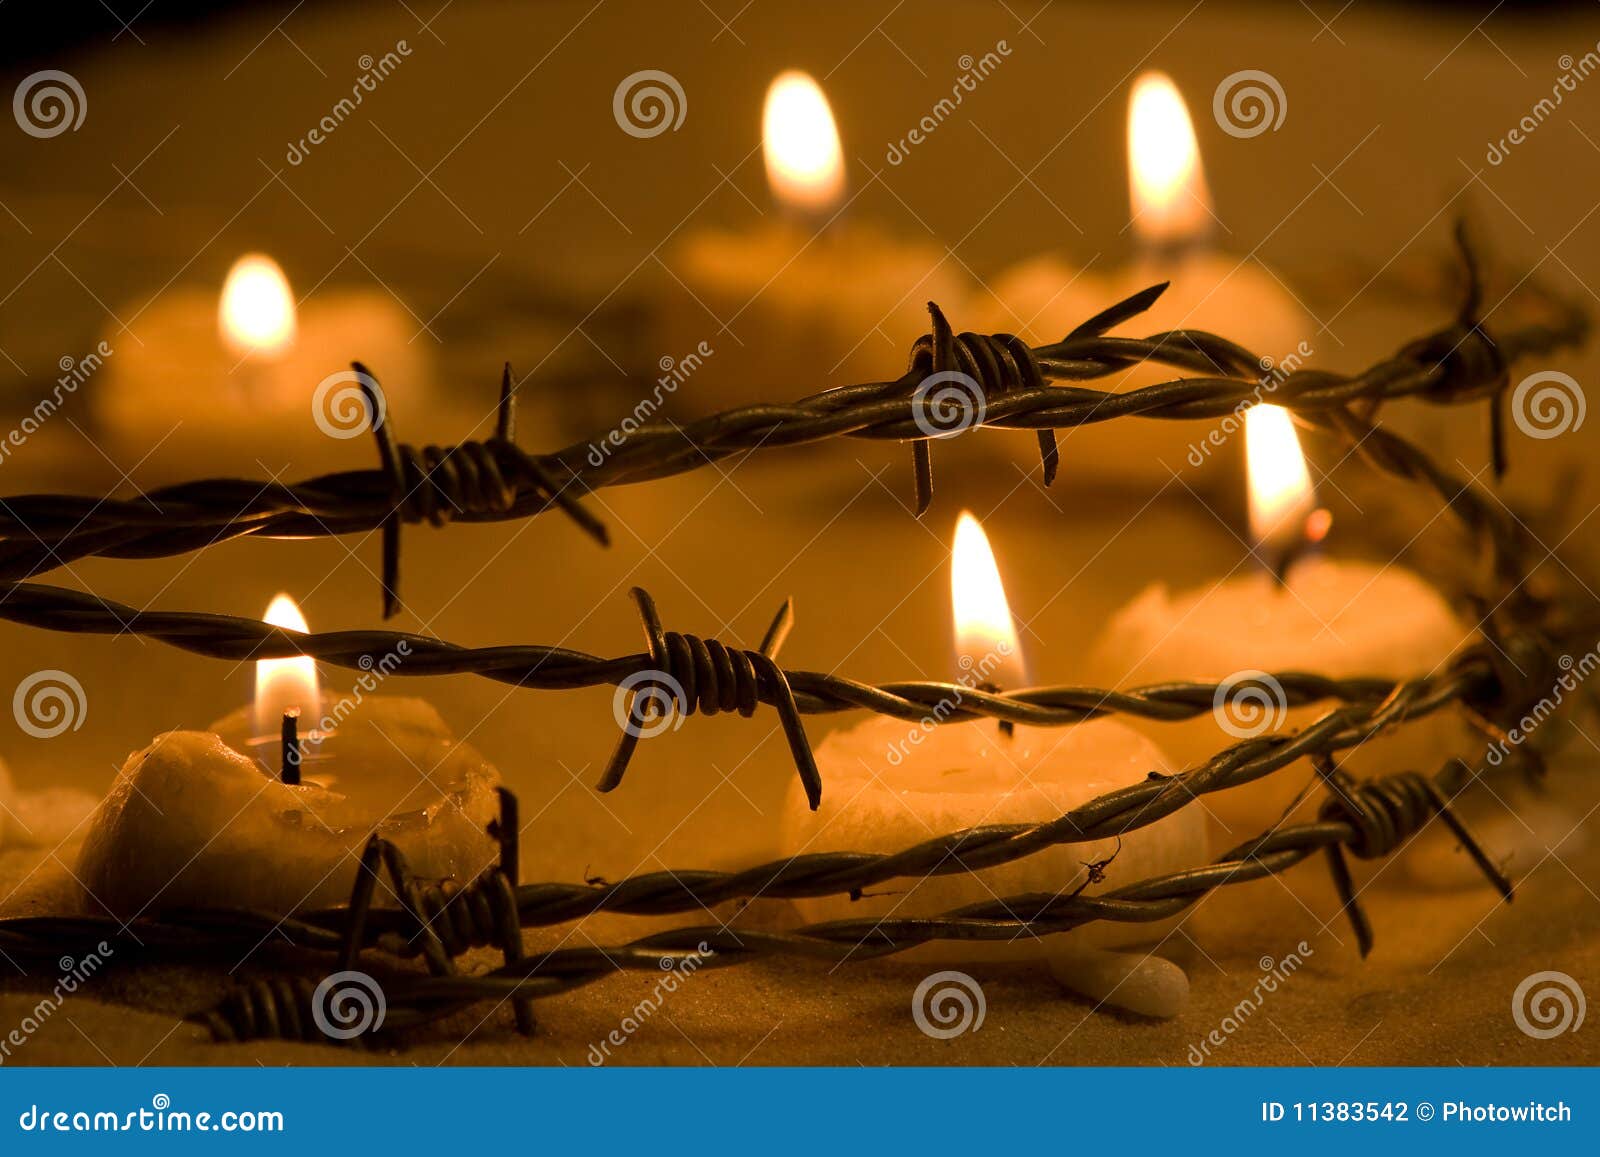 candles for freedom